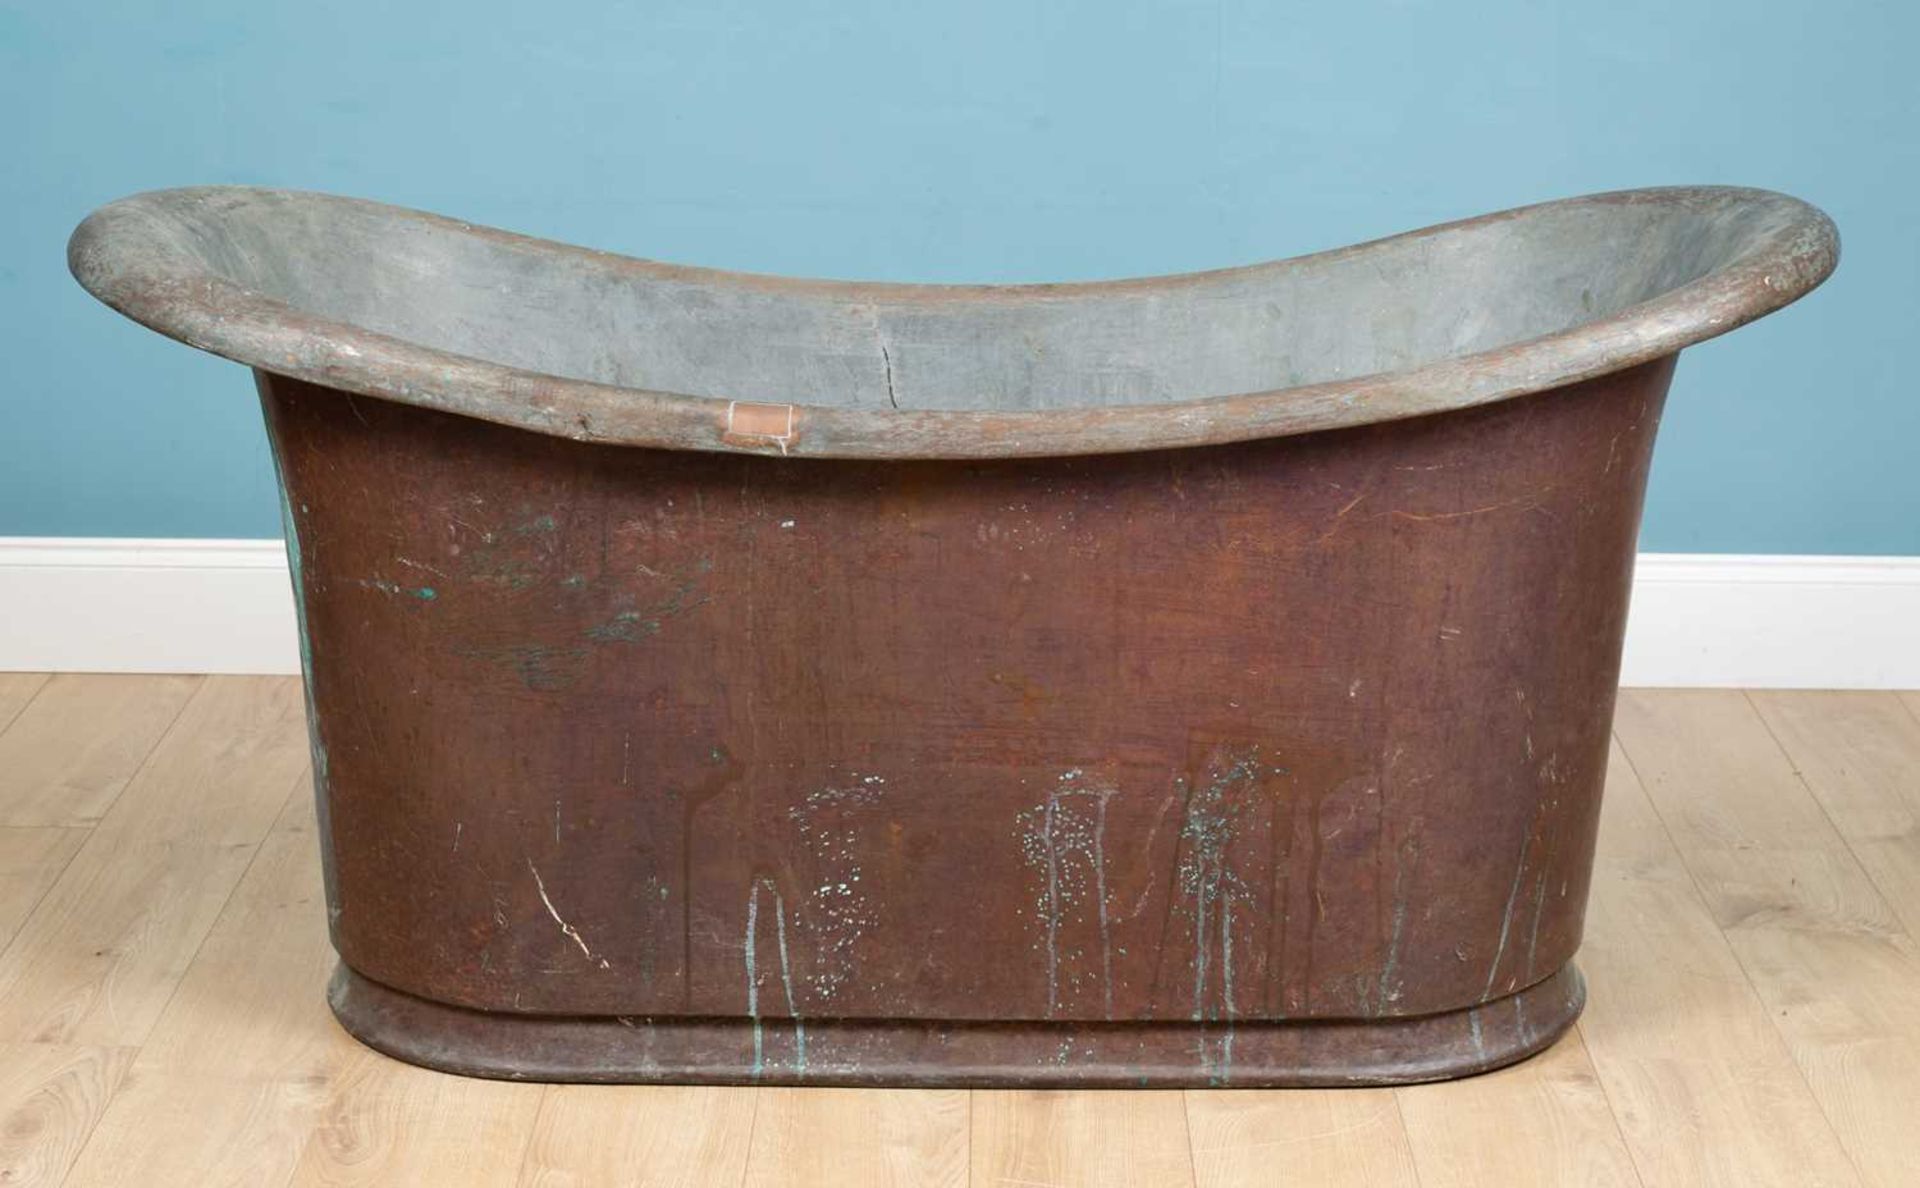 An antique 19th century roll top patinated copper bath